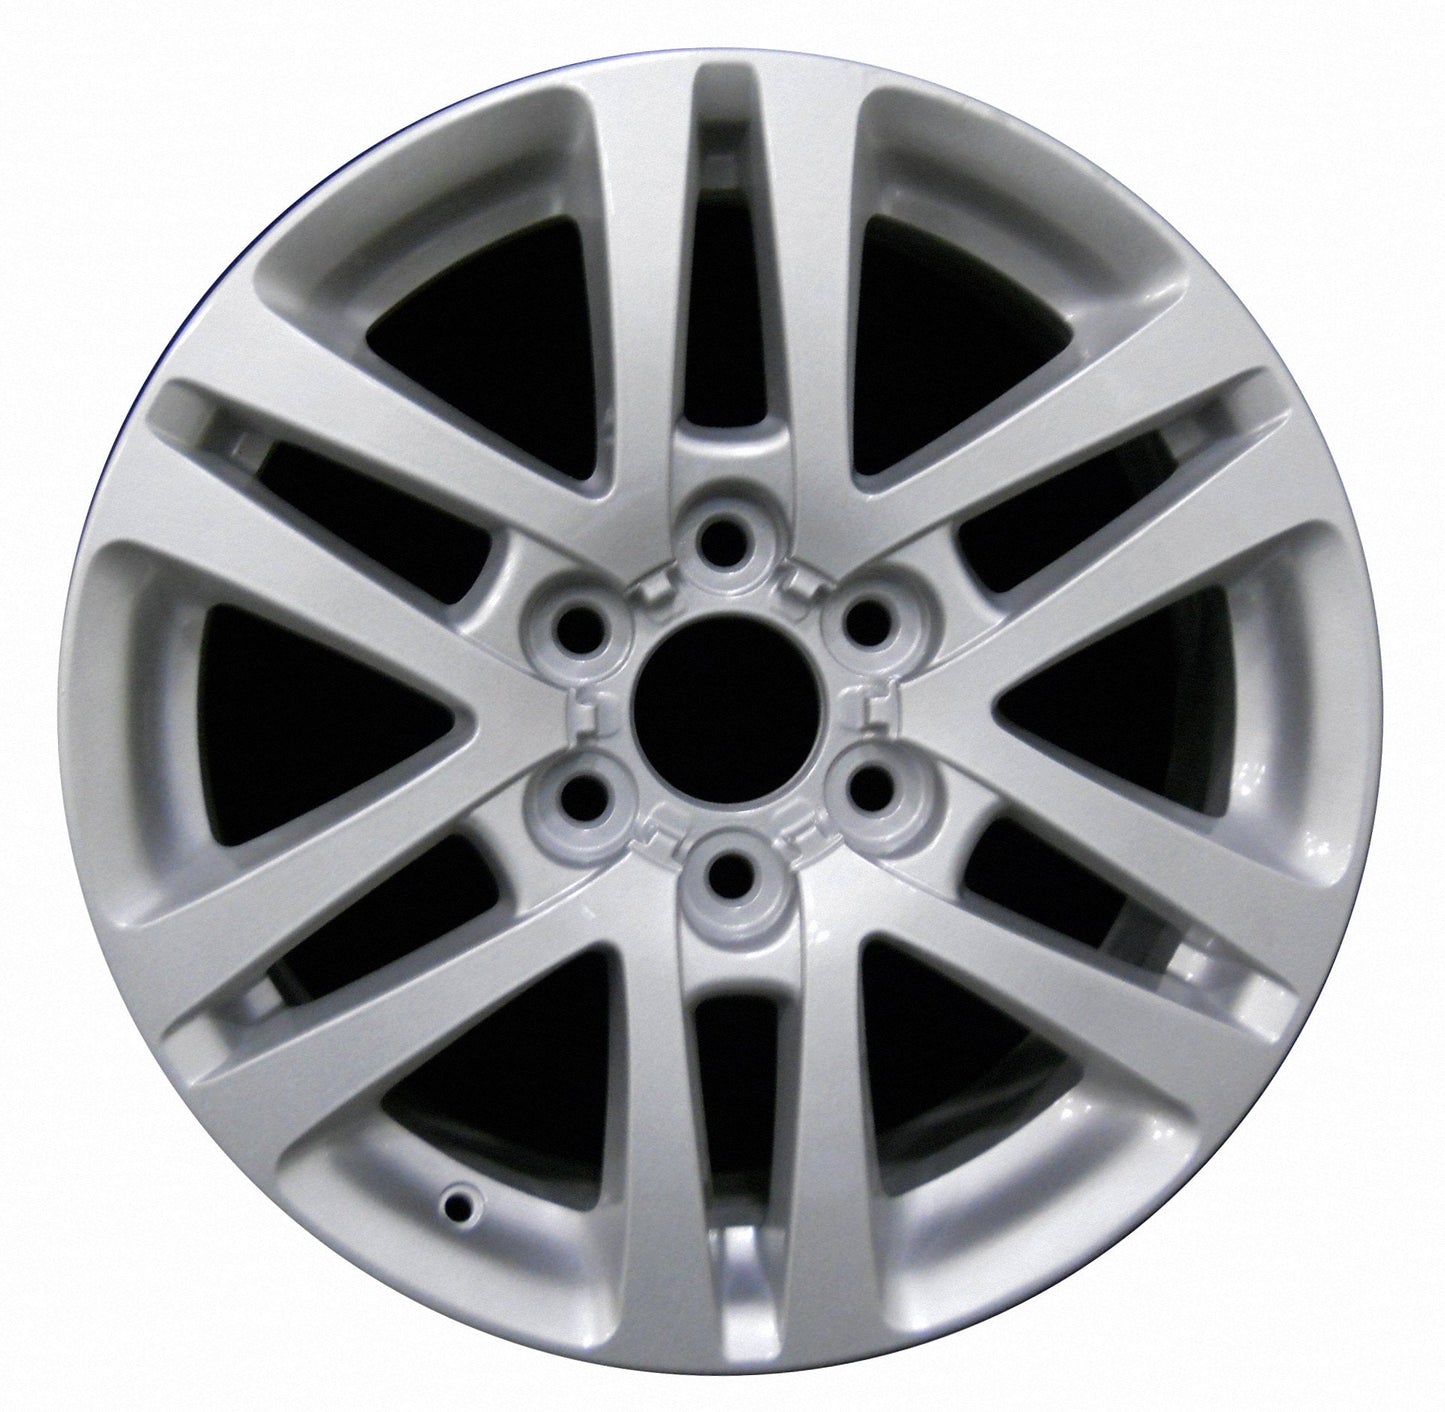 Buick Enclave  2008, 2009, 2010, 2011, 2012, 2013, 2014, 2015, 2016 Factory OEM Car Wheel Size 18x7.5 Alloy WAO.4076.PS02.FF